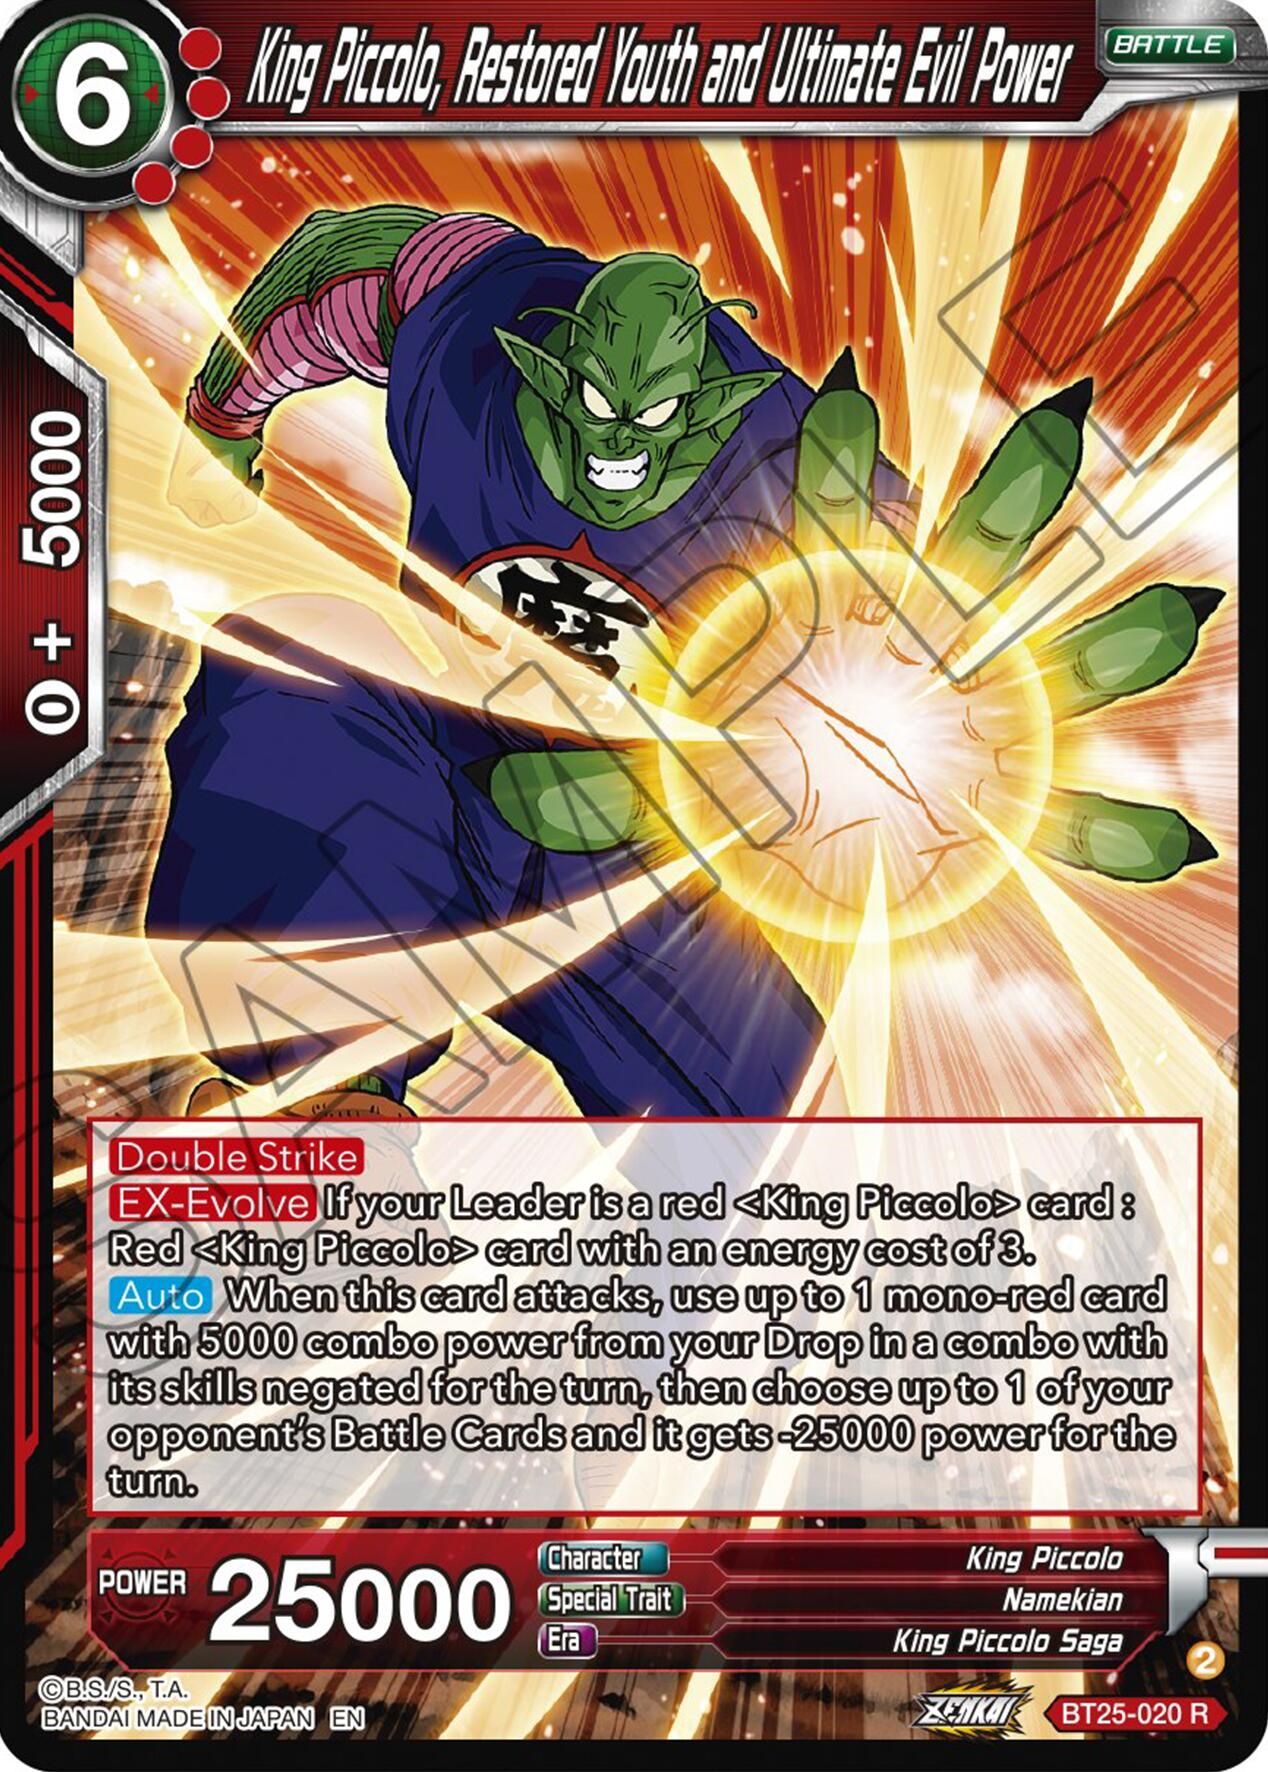 King Piccolo, Restored Youth and Ultimate Evil Power (BT25-020) [Legend of the Dragon Balls] | North Valley Games